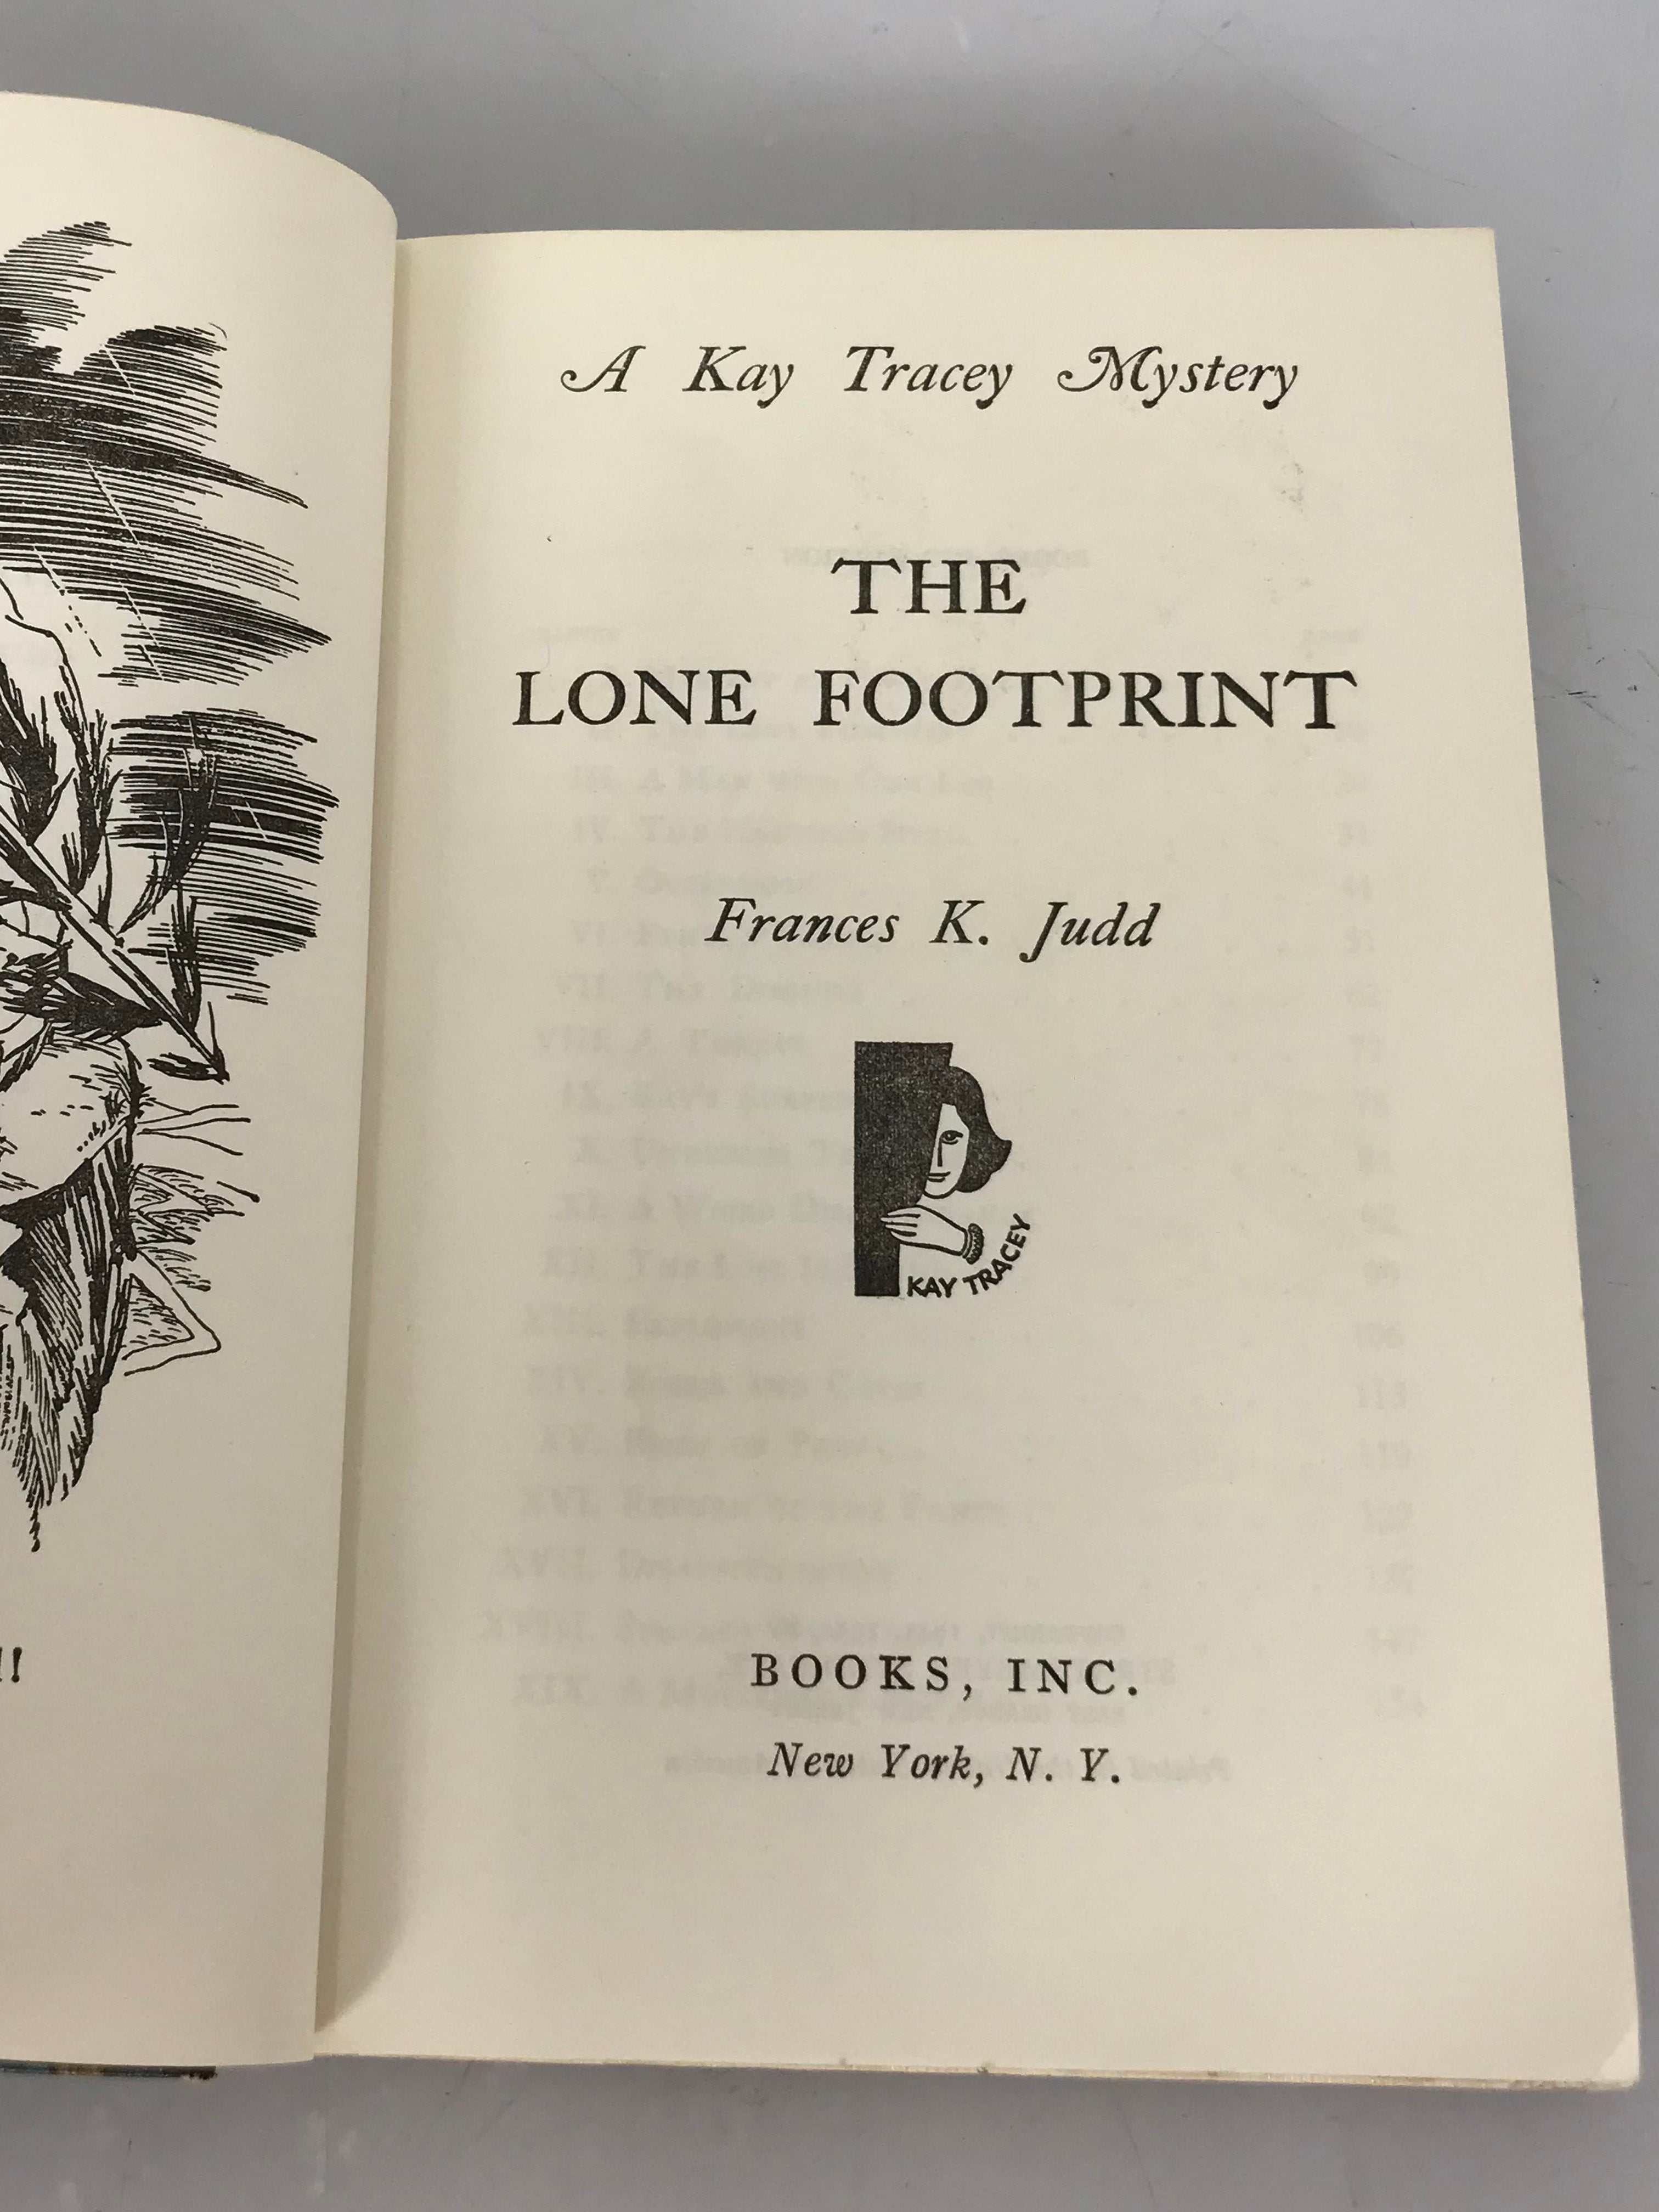 The Lone Footprint by Frances Judd a Kay Tracey Mystery 1952 HC